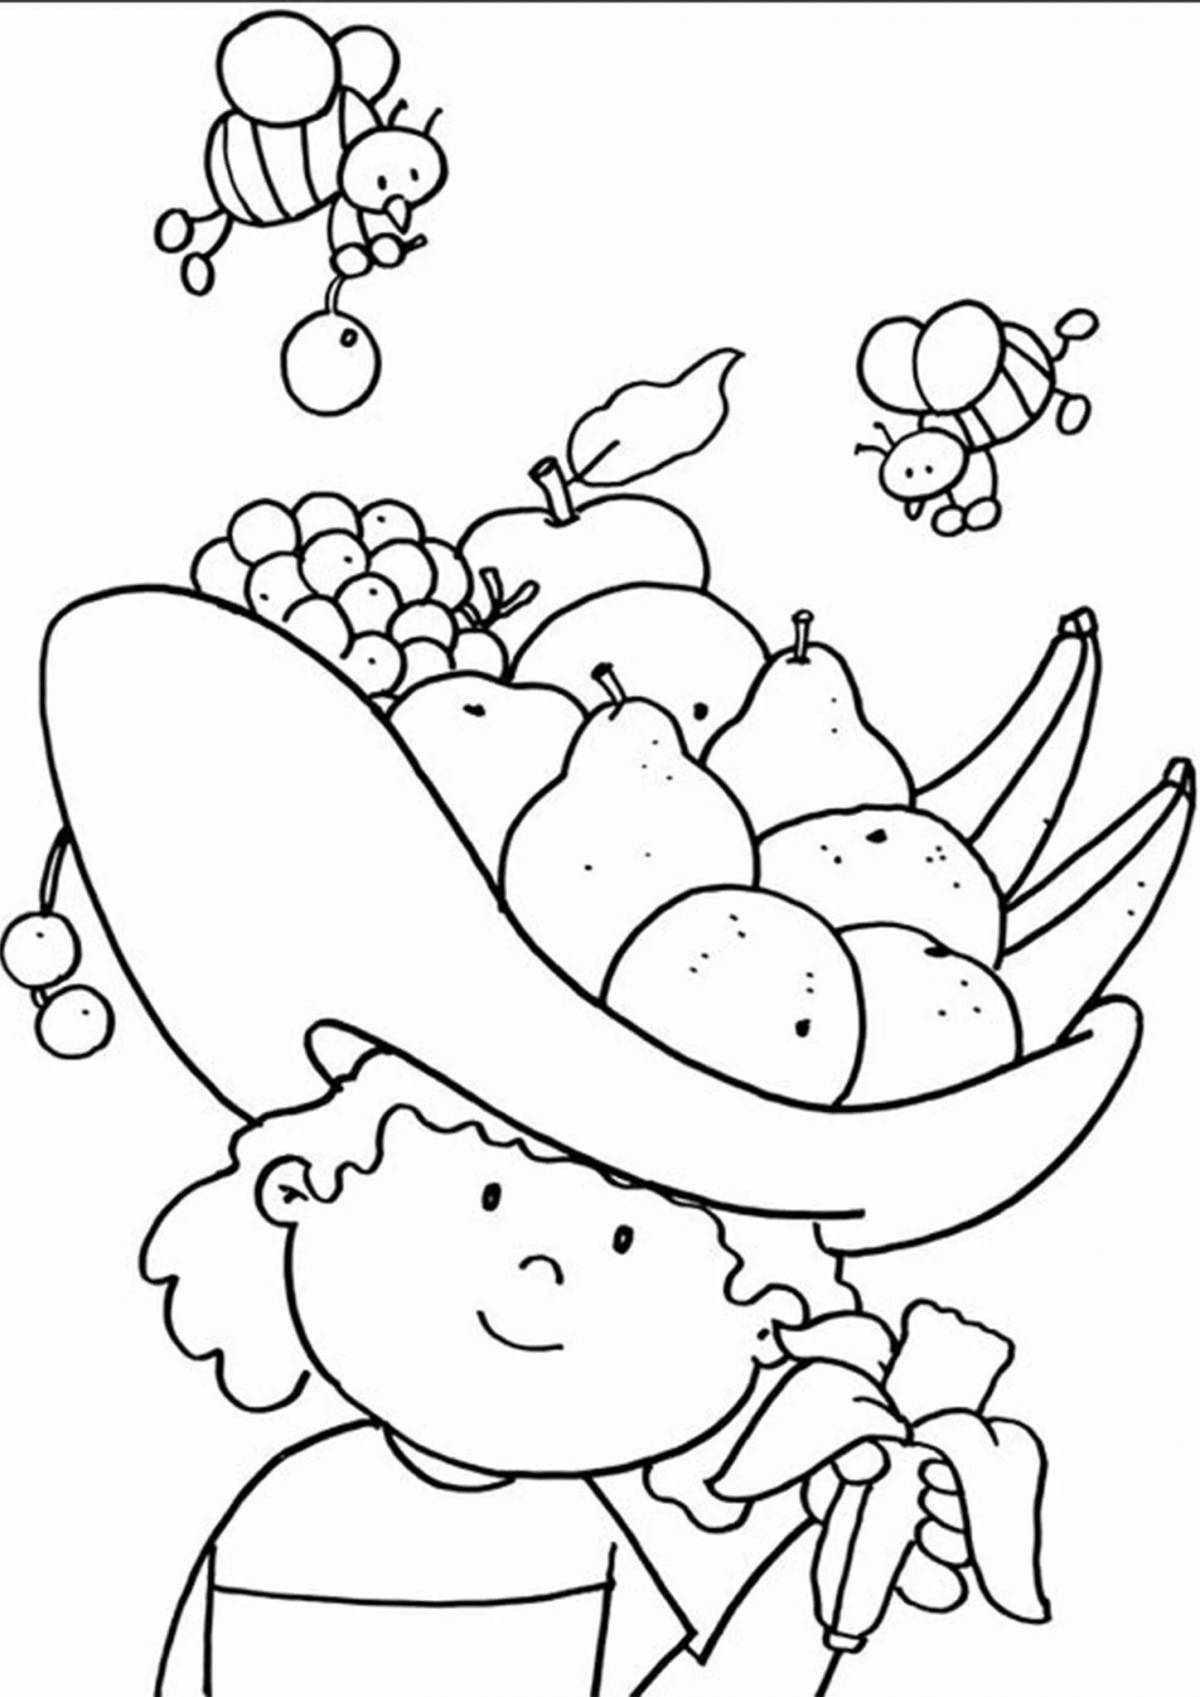 Crunchy food fruit coloring pages